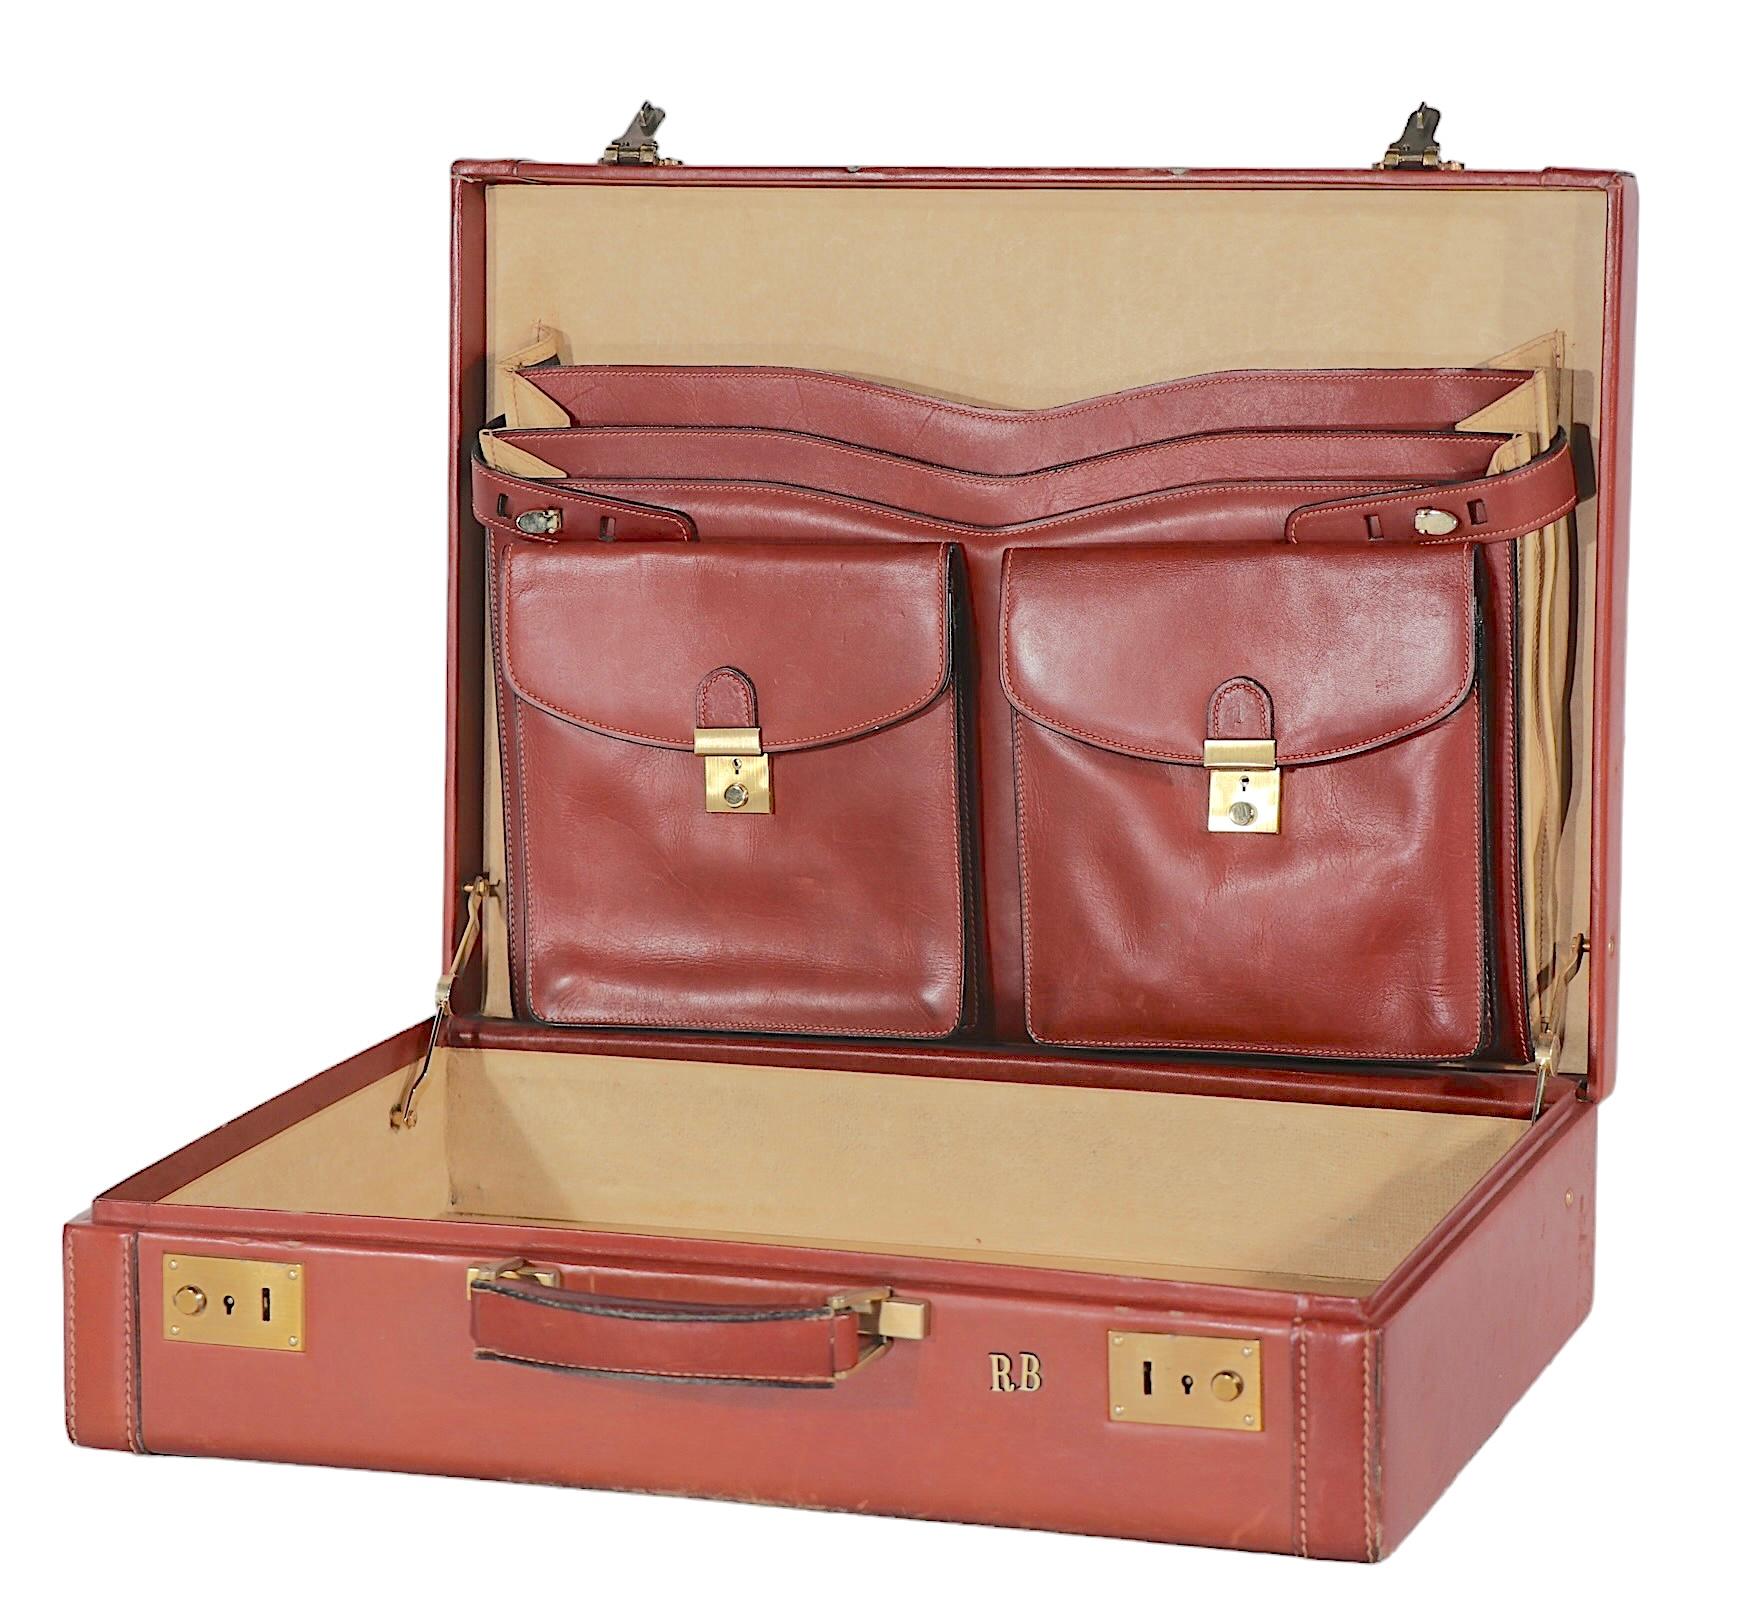  Mid Century Art Deco Hard Case Leather Attache Briefcase  after Bally, Hermes  In Good Condition For Sale In New York, NY